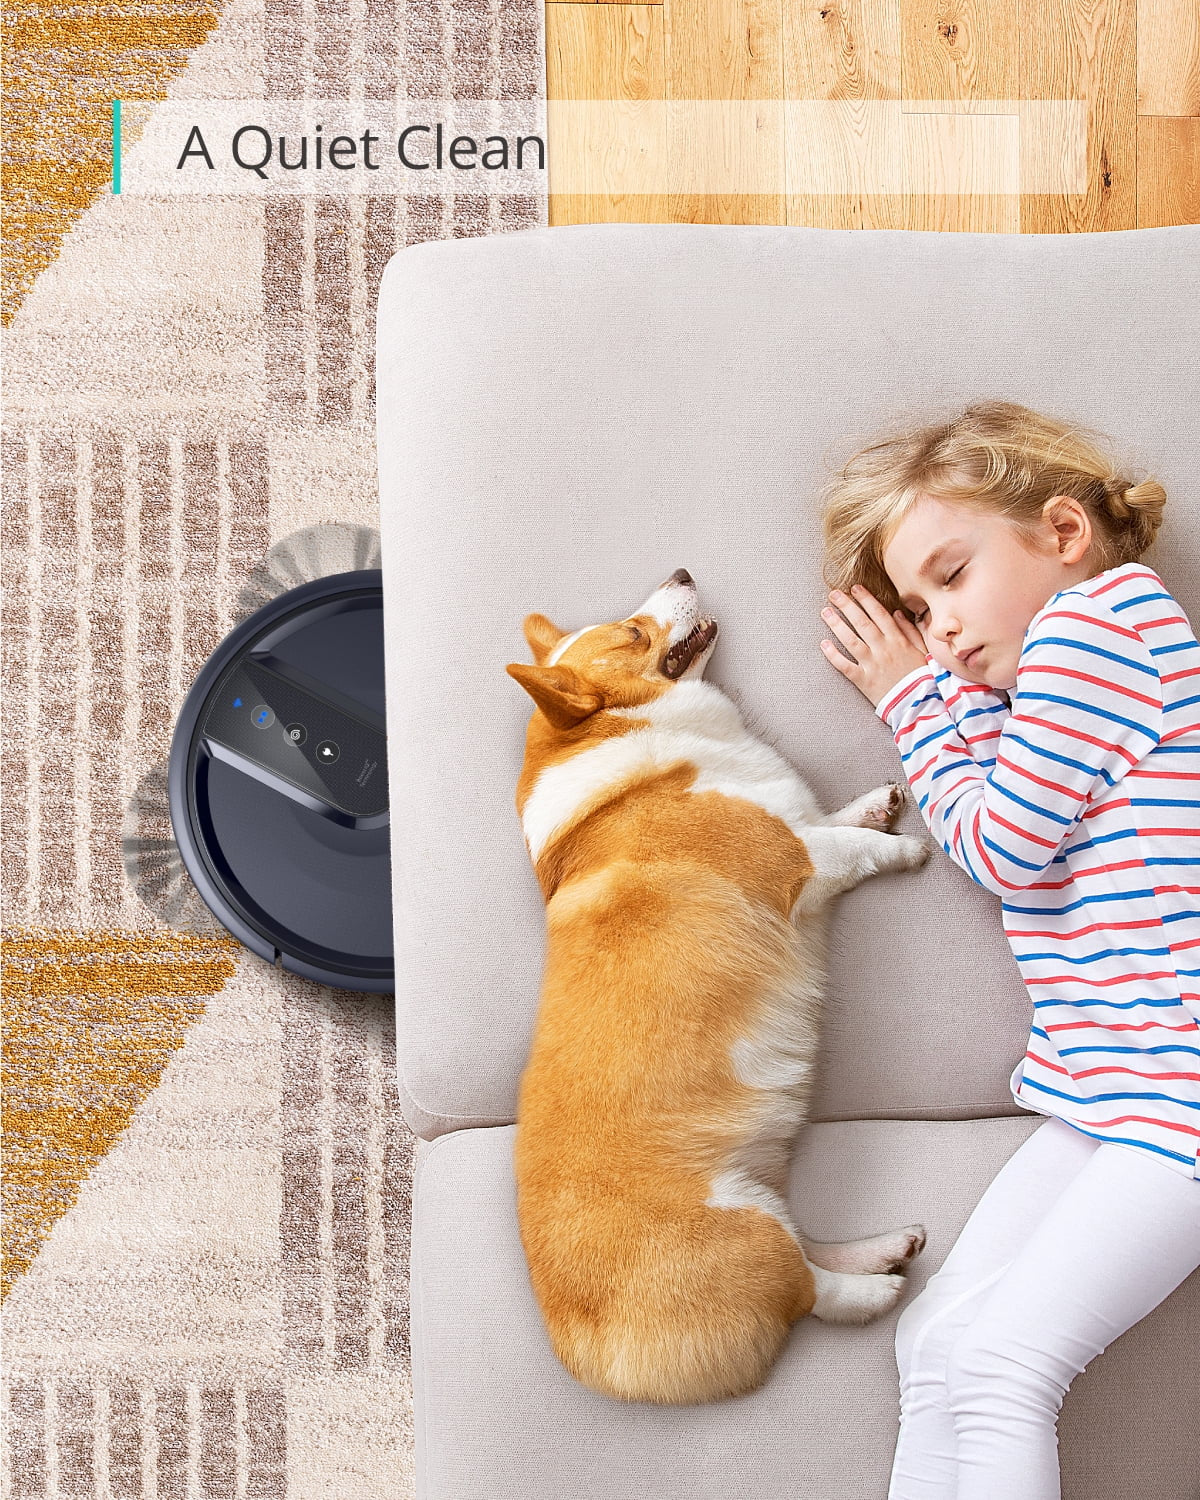 25C Wi-Fi Connected Robot Vacuum, Great for Picking up Pet Hairs, Quiet, Slim